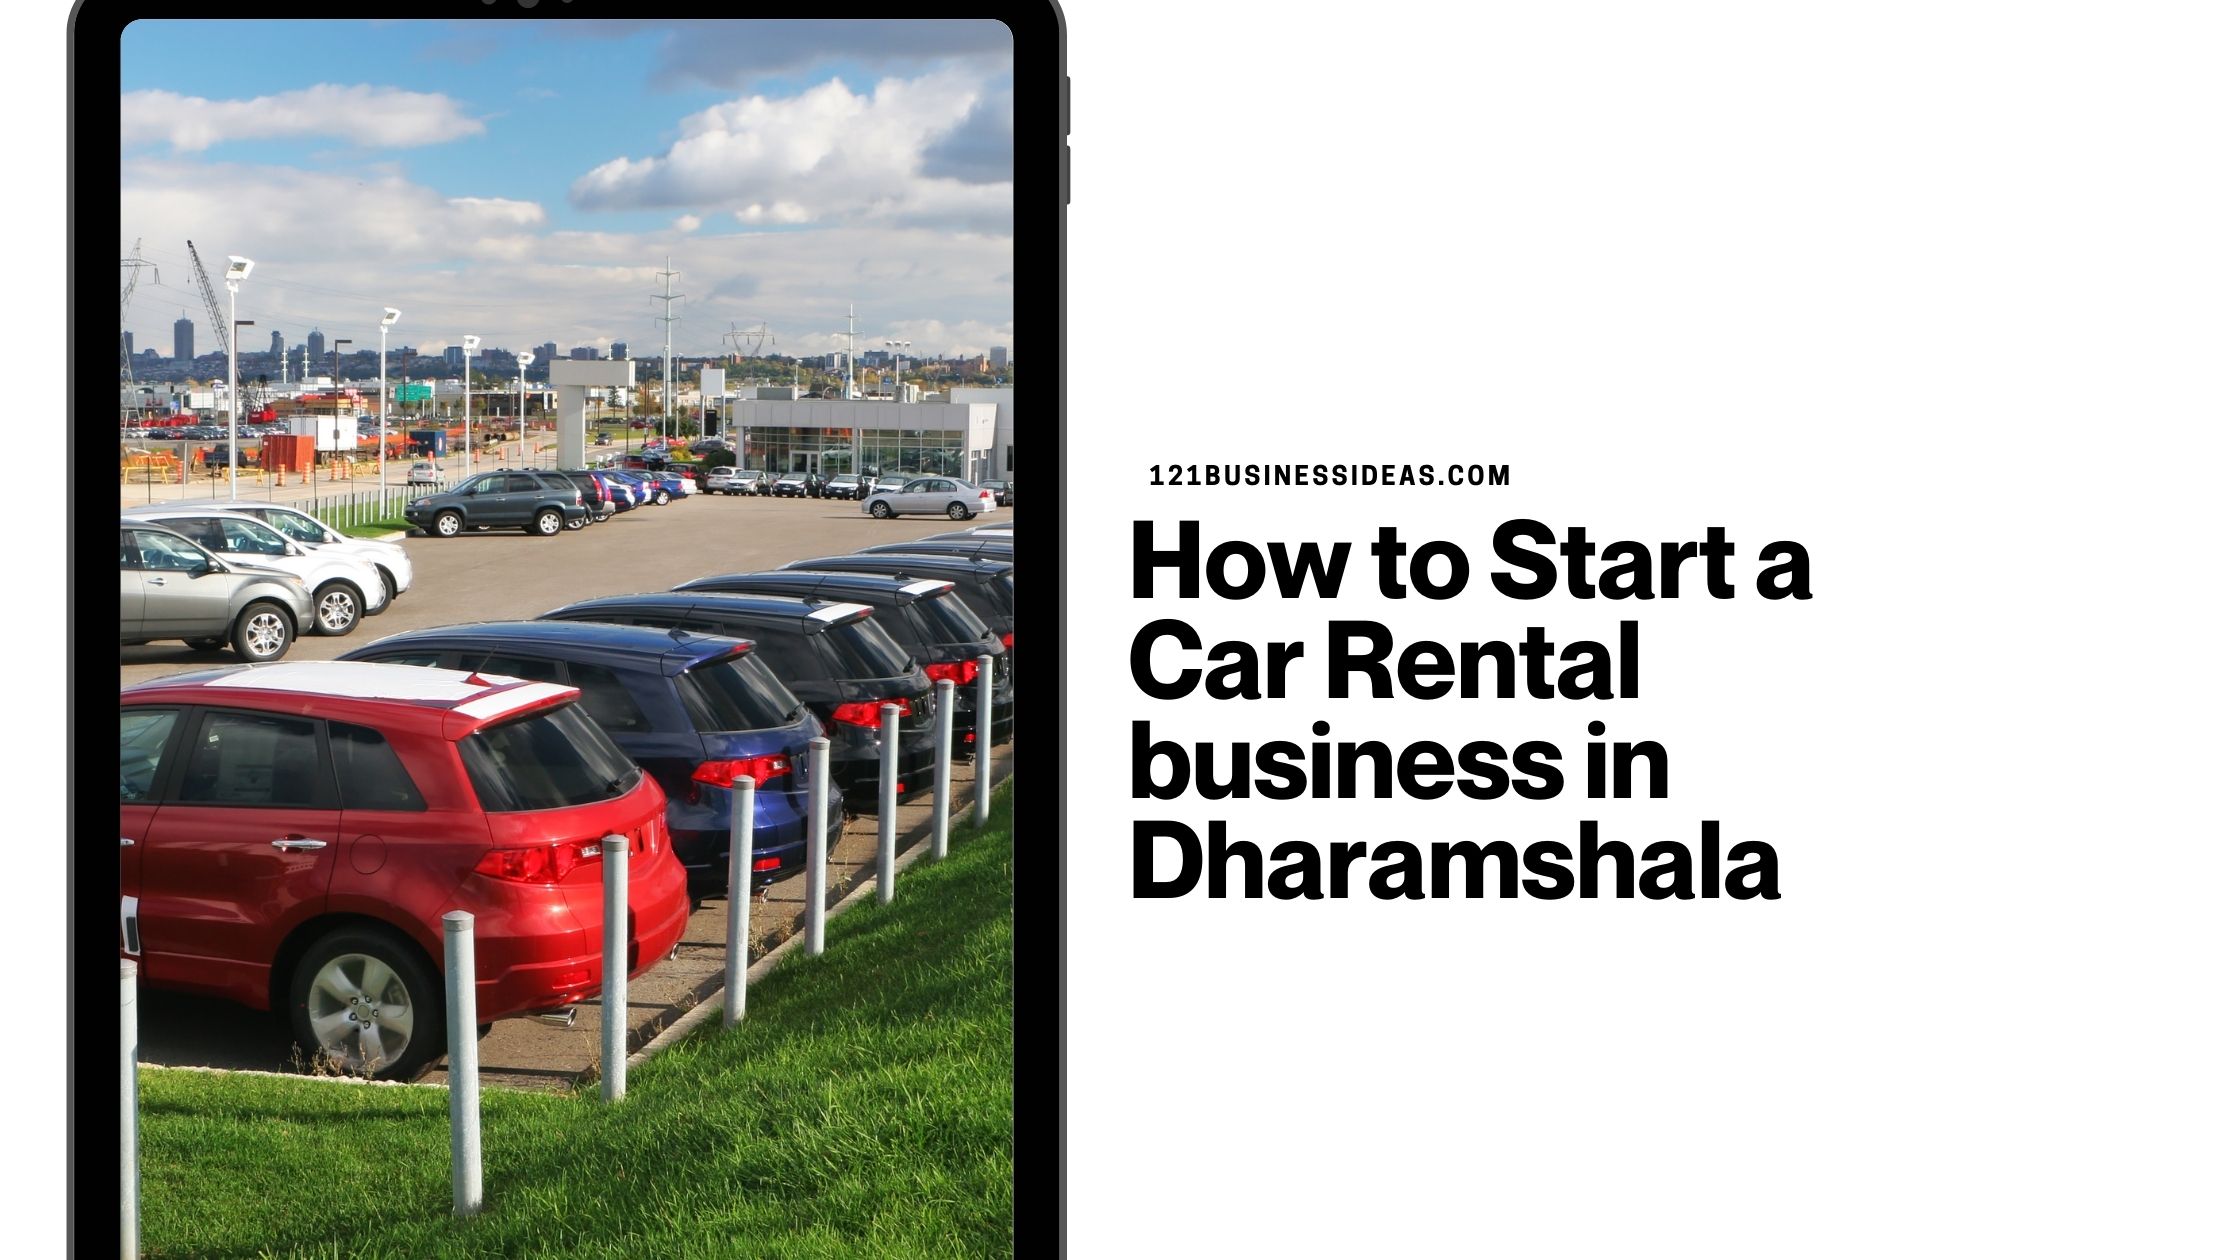 How to Start a Car Rental business in Dharamshala (1)